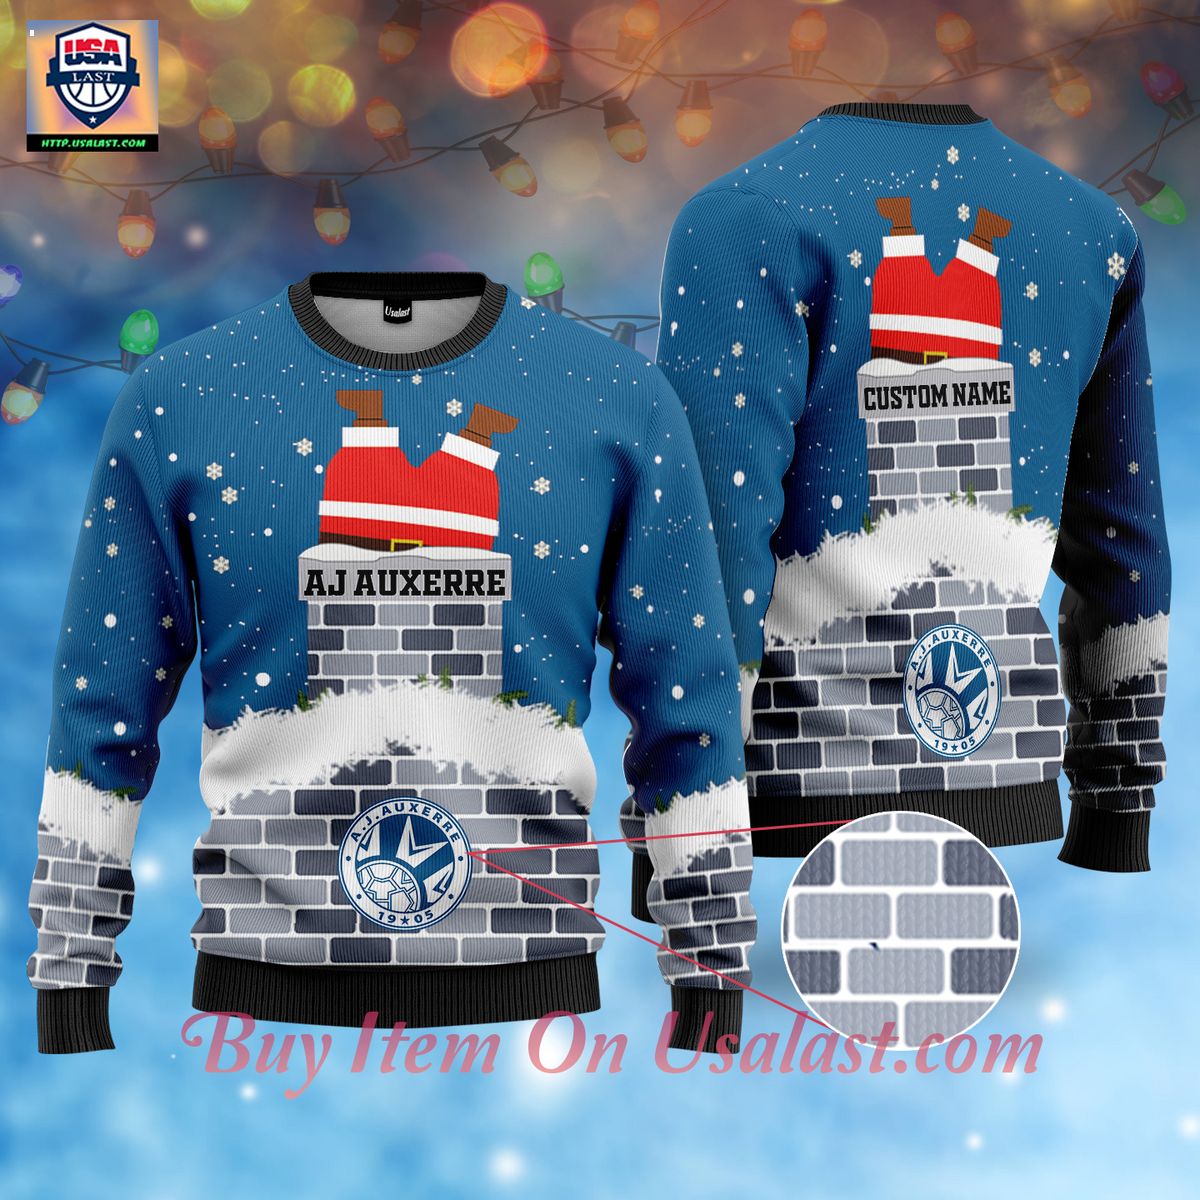 Here’s AJ Auxerre Santa Claus Custom Name Ugly Christmas Sweater